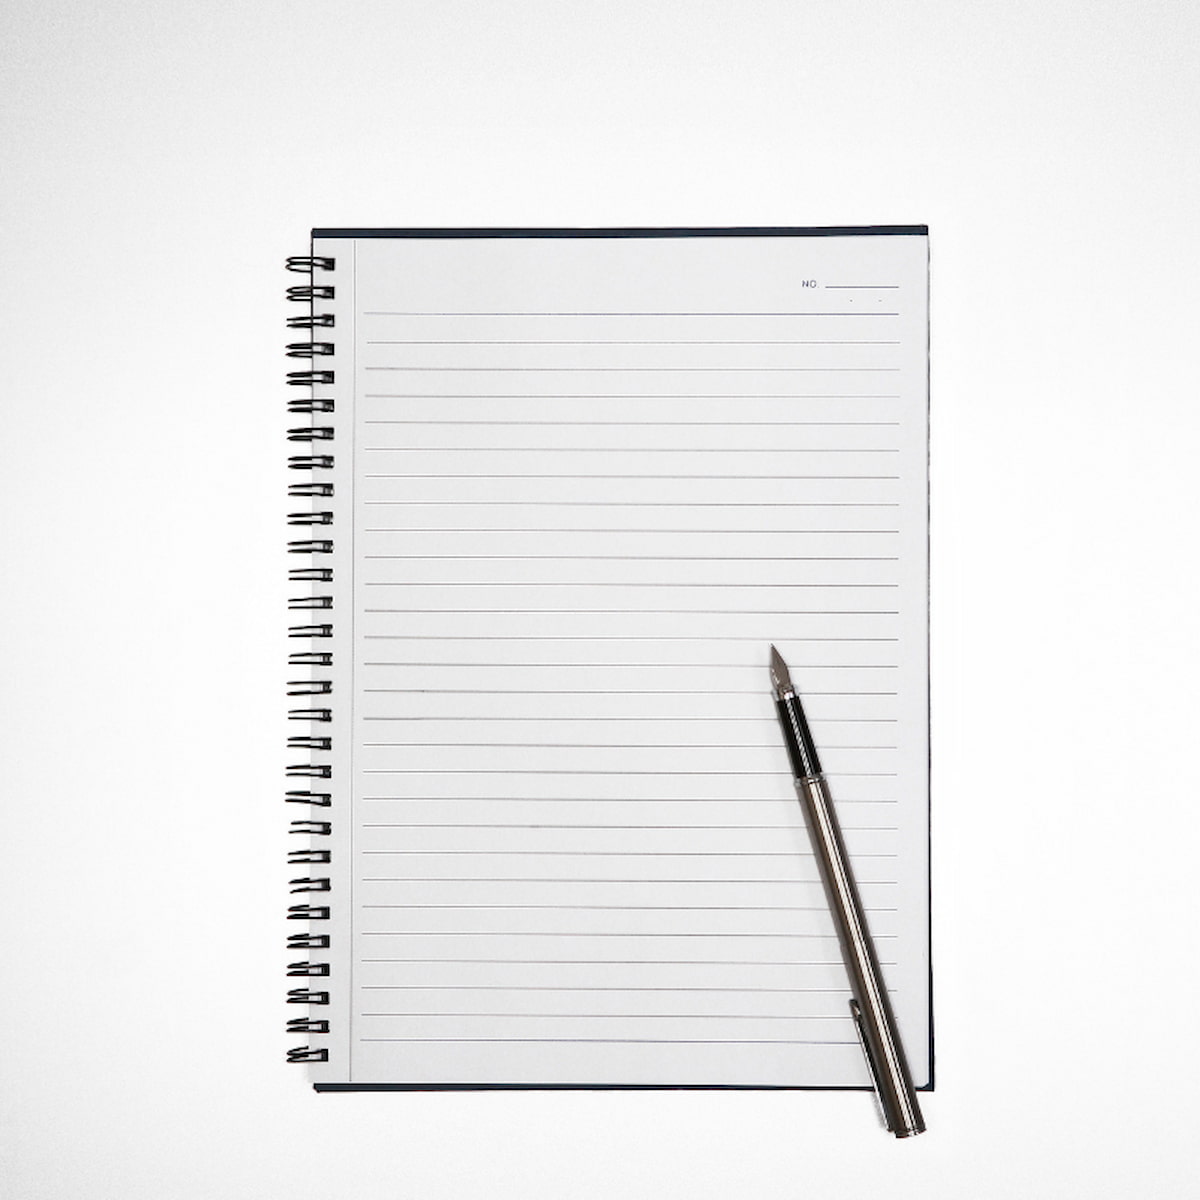 Image of a lined notebook with a pen sitting on top.